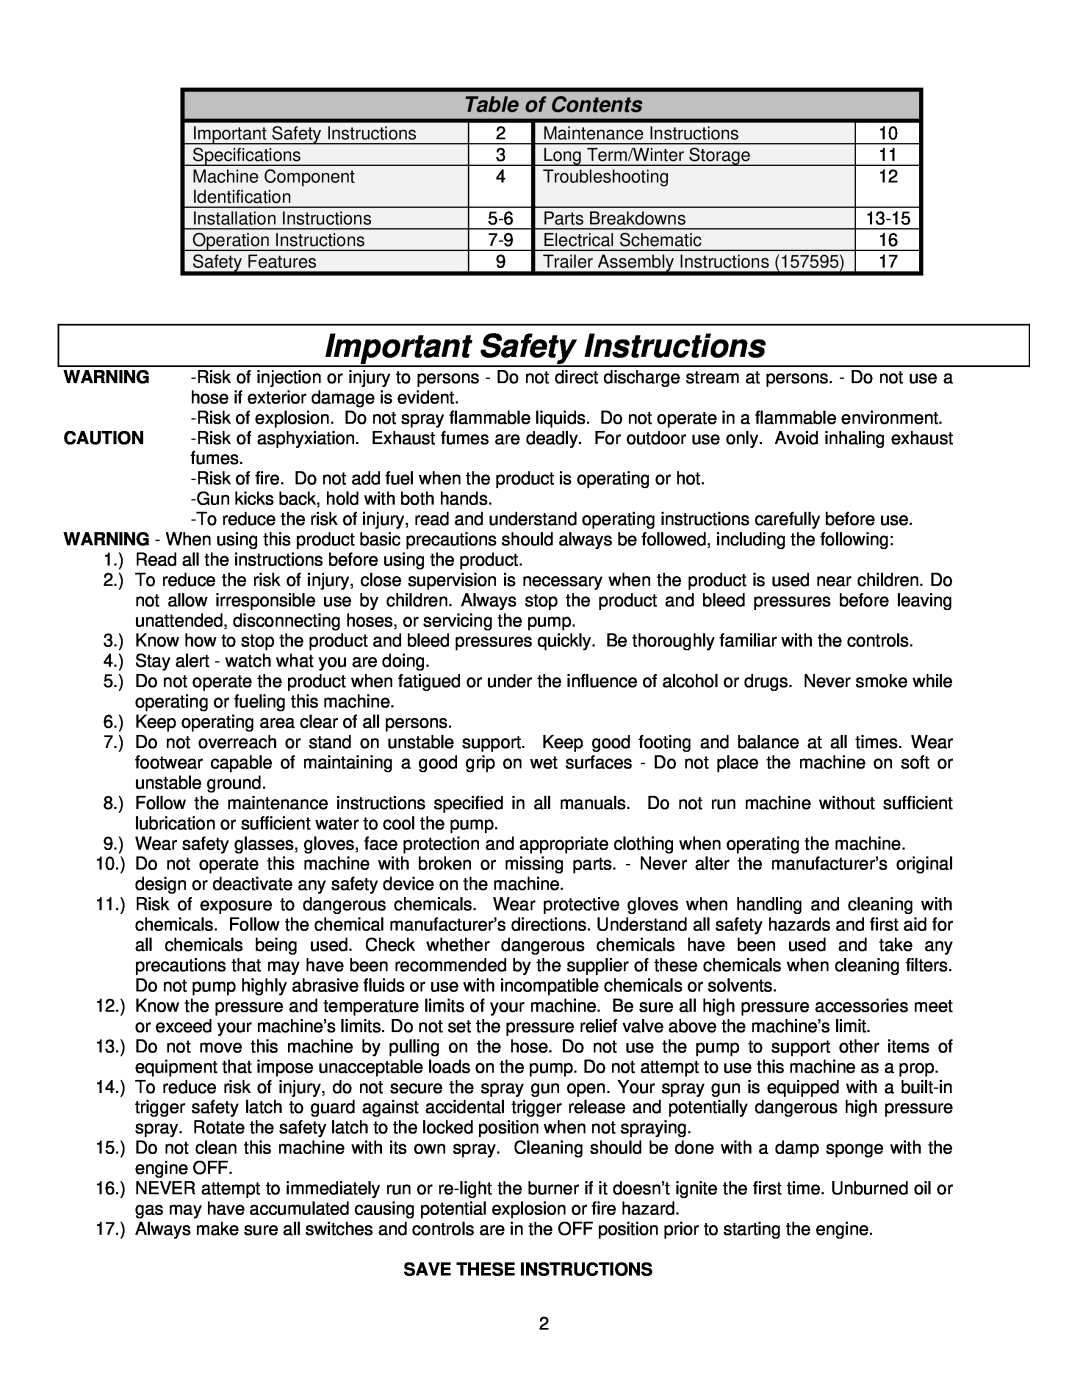 North Star M157594I specifications Important Safety Instructions, Table of Contents, Save These Instructions 